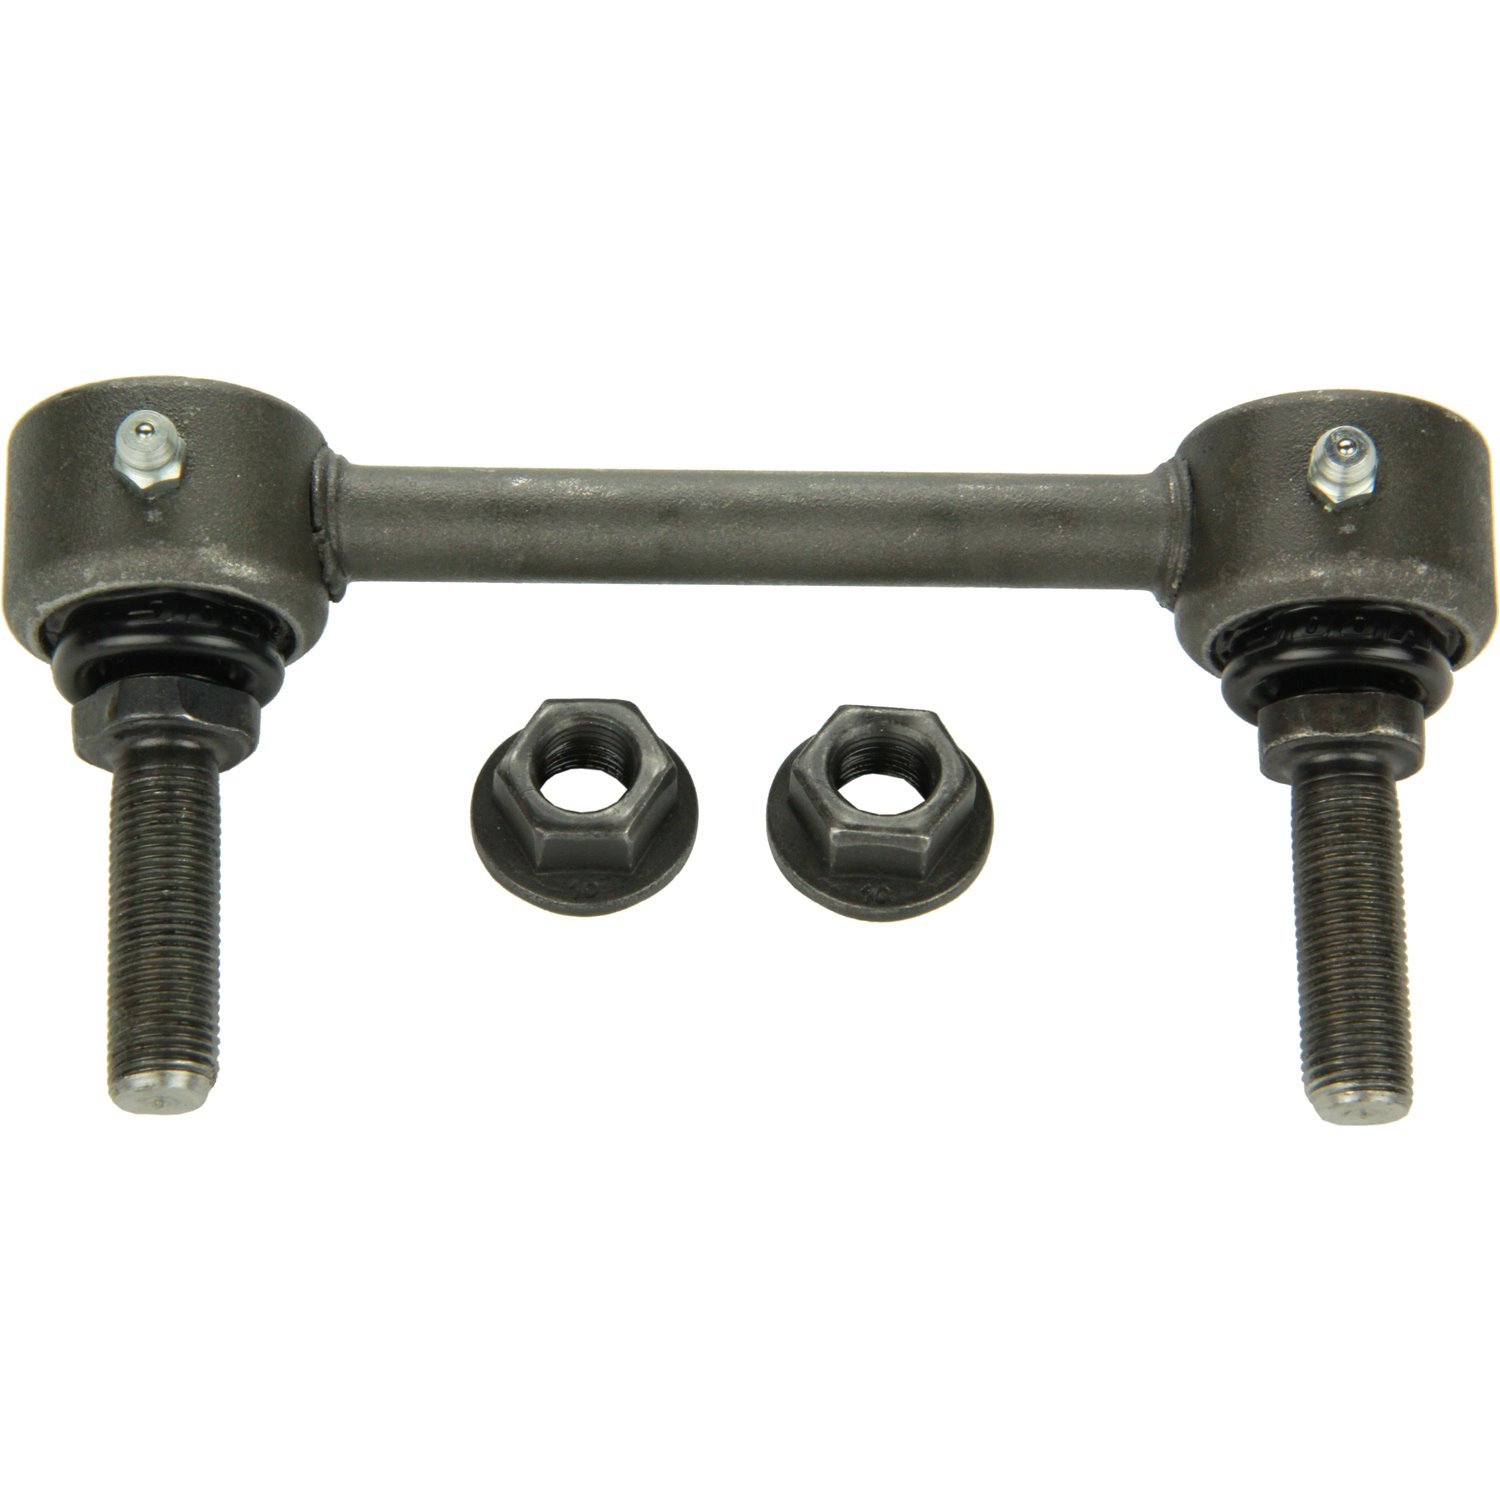 K750185 Front Sway Bar Link for Select 2006-2010